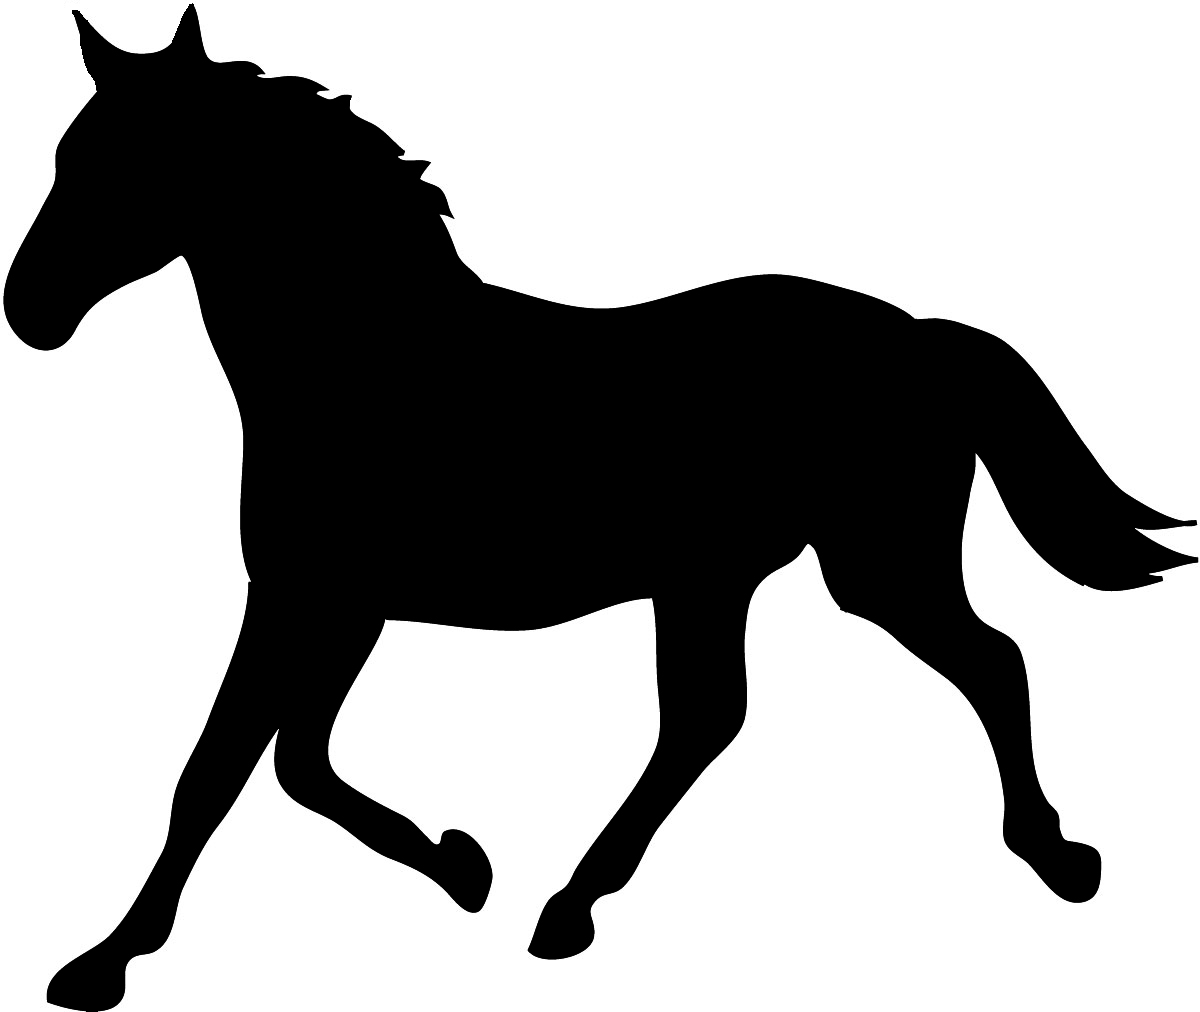 Running Horse Silhouette | Clipart Panda - Free Clipart Images